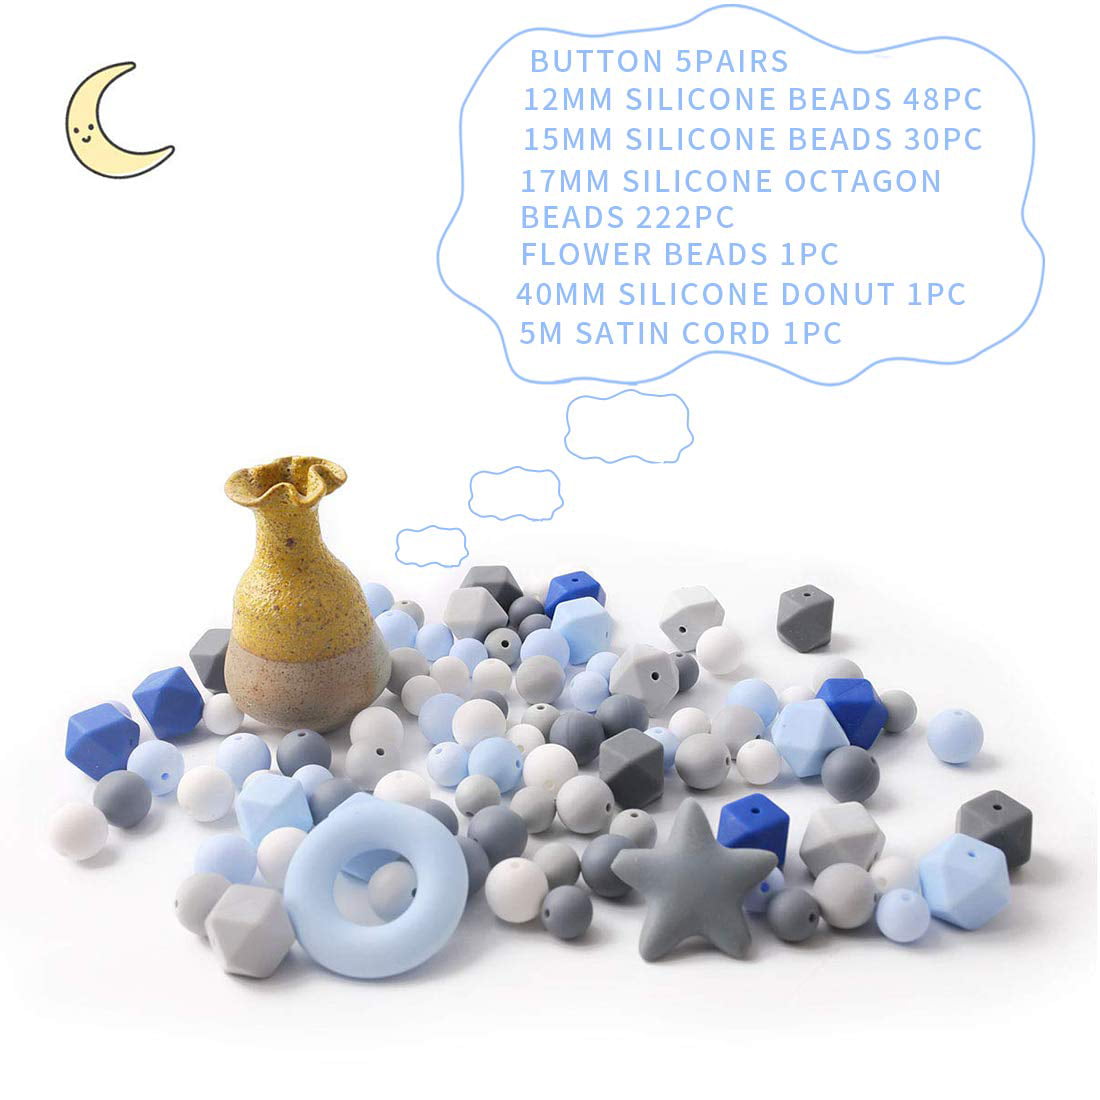 Silicone Beads Bulk 100PC Starry Sky Printing Series Silicone Beads Kit DIY  Jewelry Nursing Necklace Accessories 